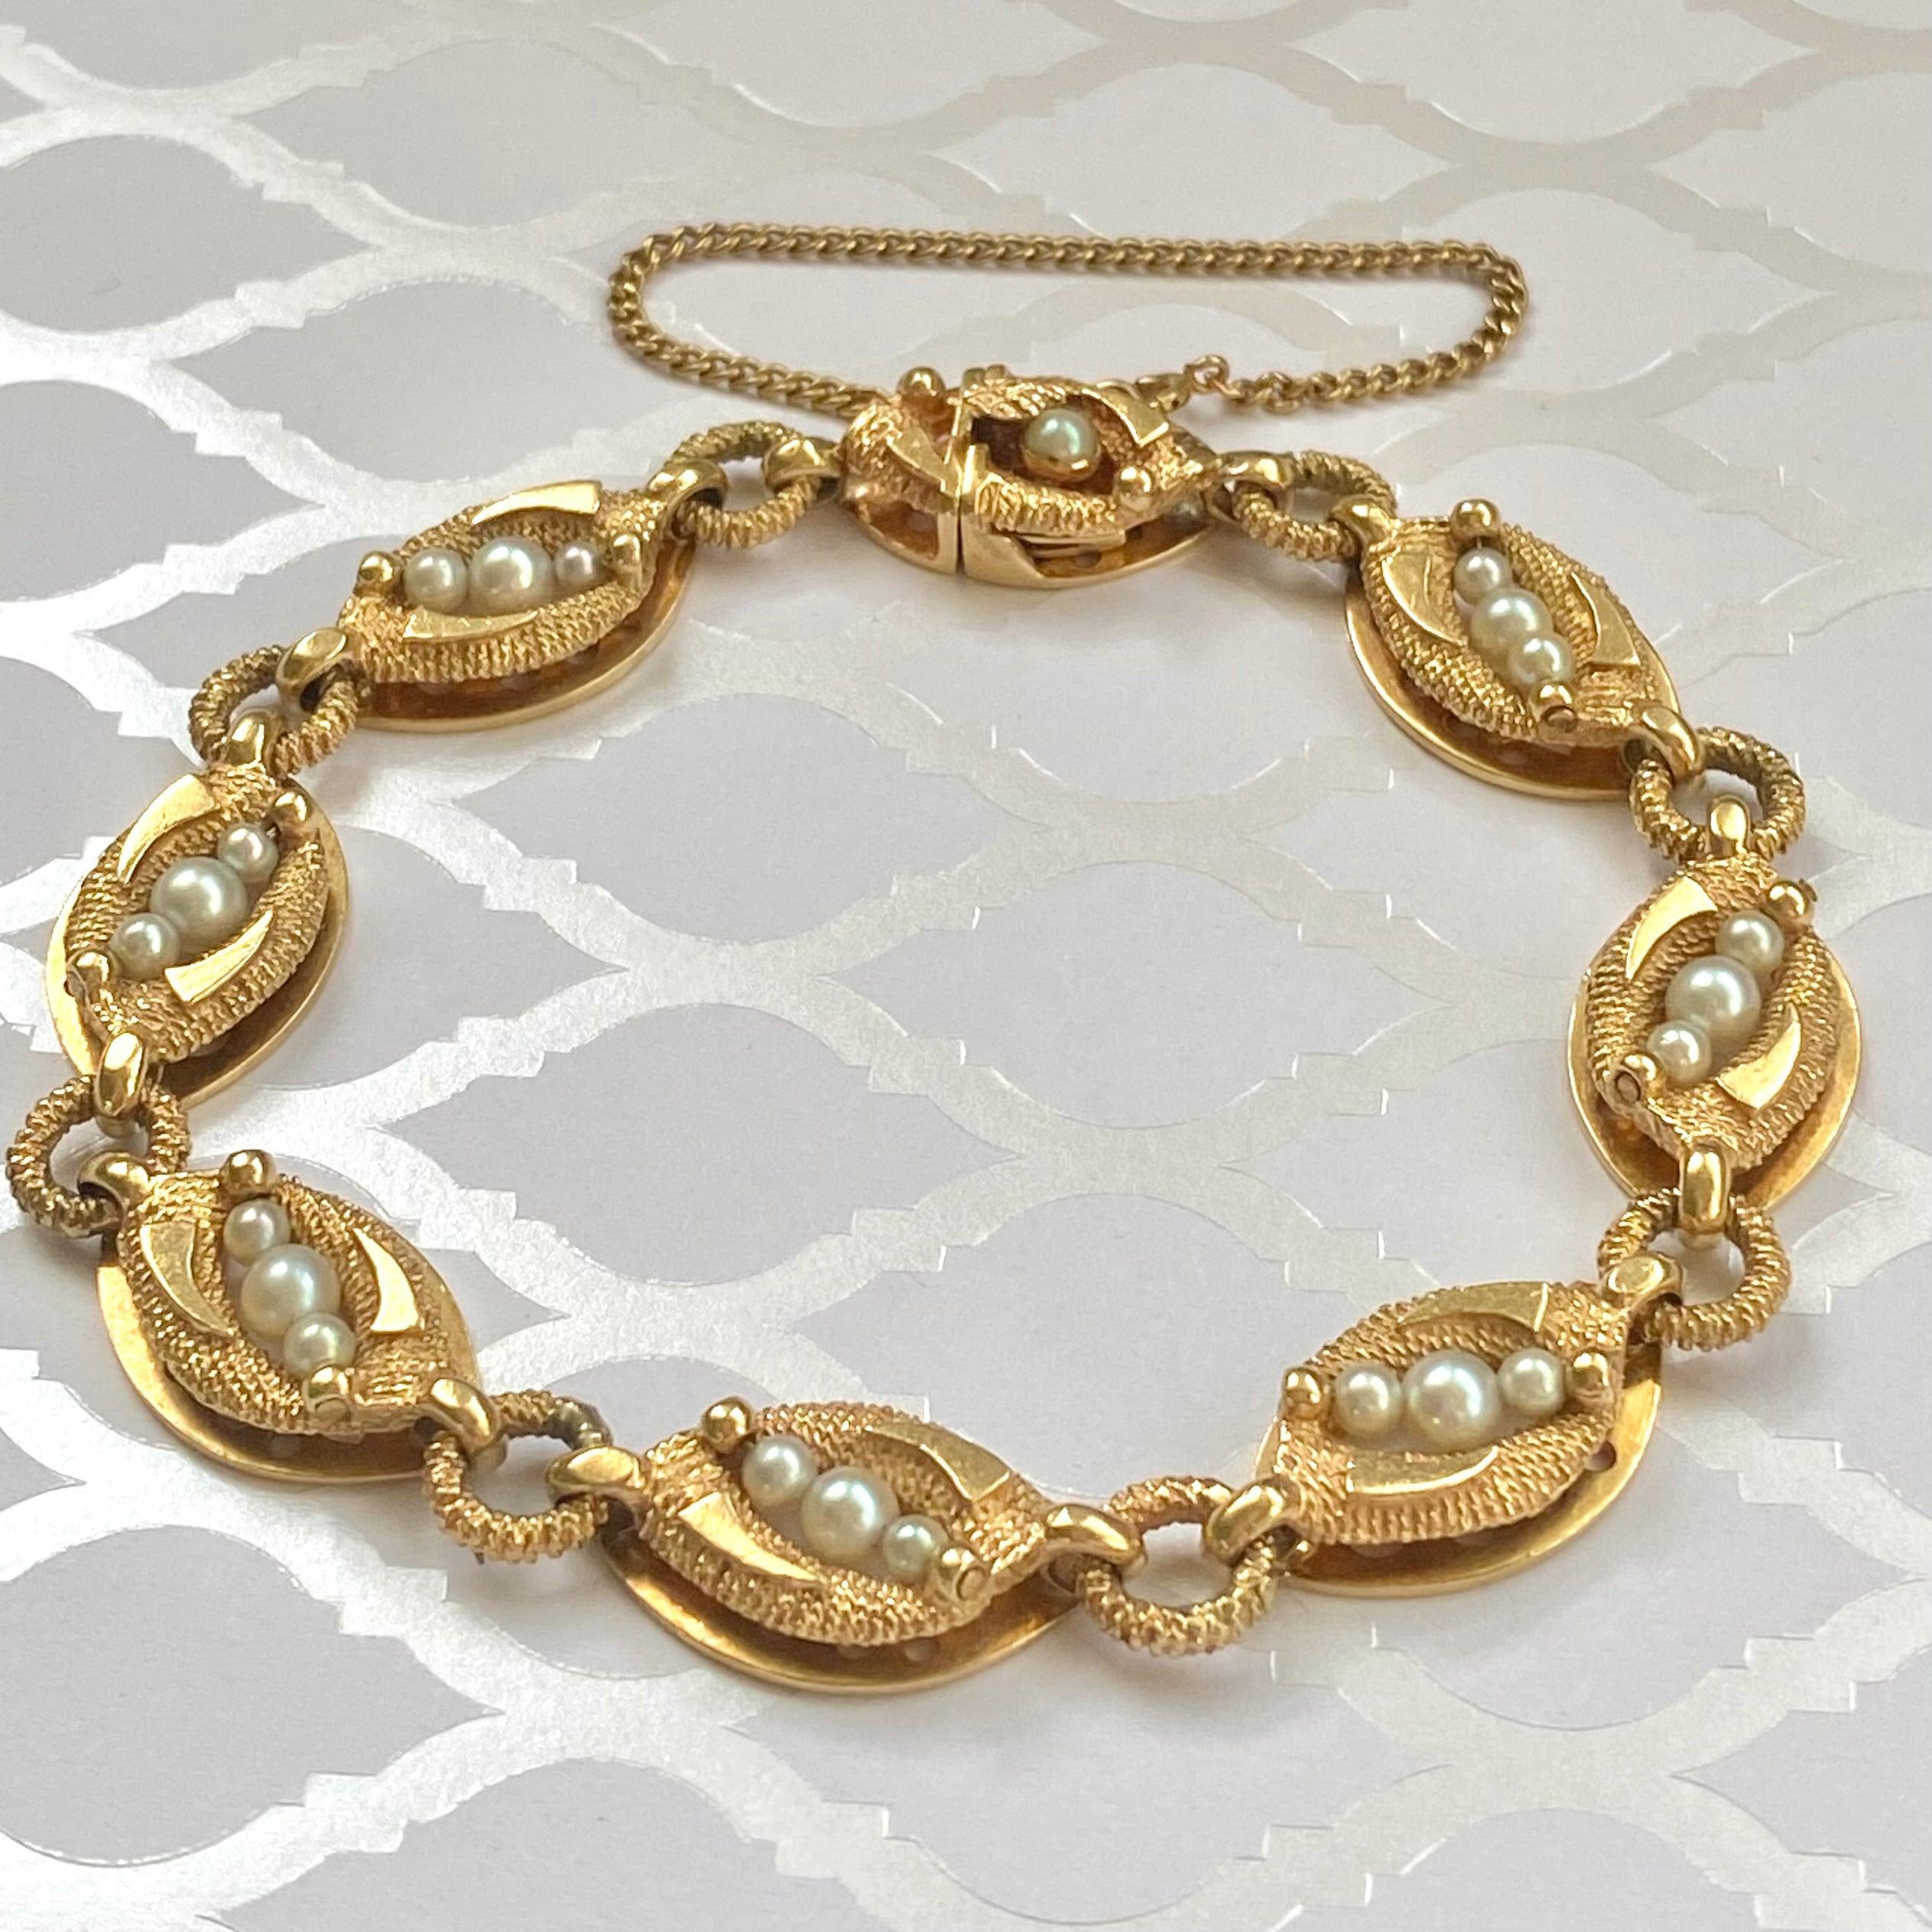 La Triomphe 14K bracelet, composed of a series of elongated gold links connected by gold hoops. Each link is set with three white pearls. The contrast of bright and textured finish gives a sophisticated look to this vintage beauty. Concealed clasp